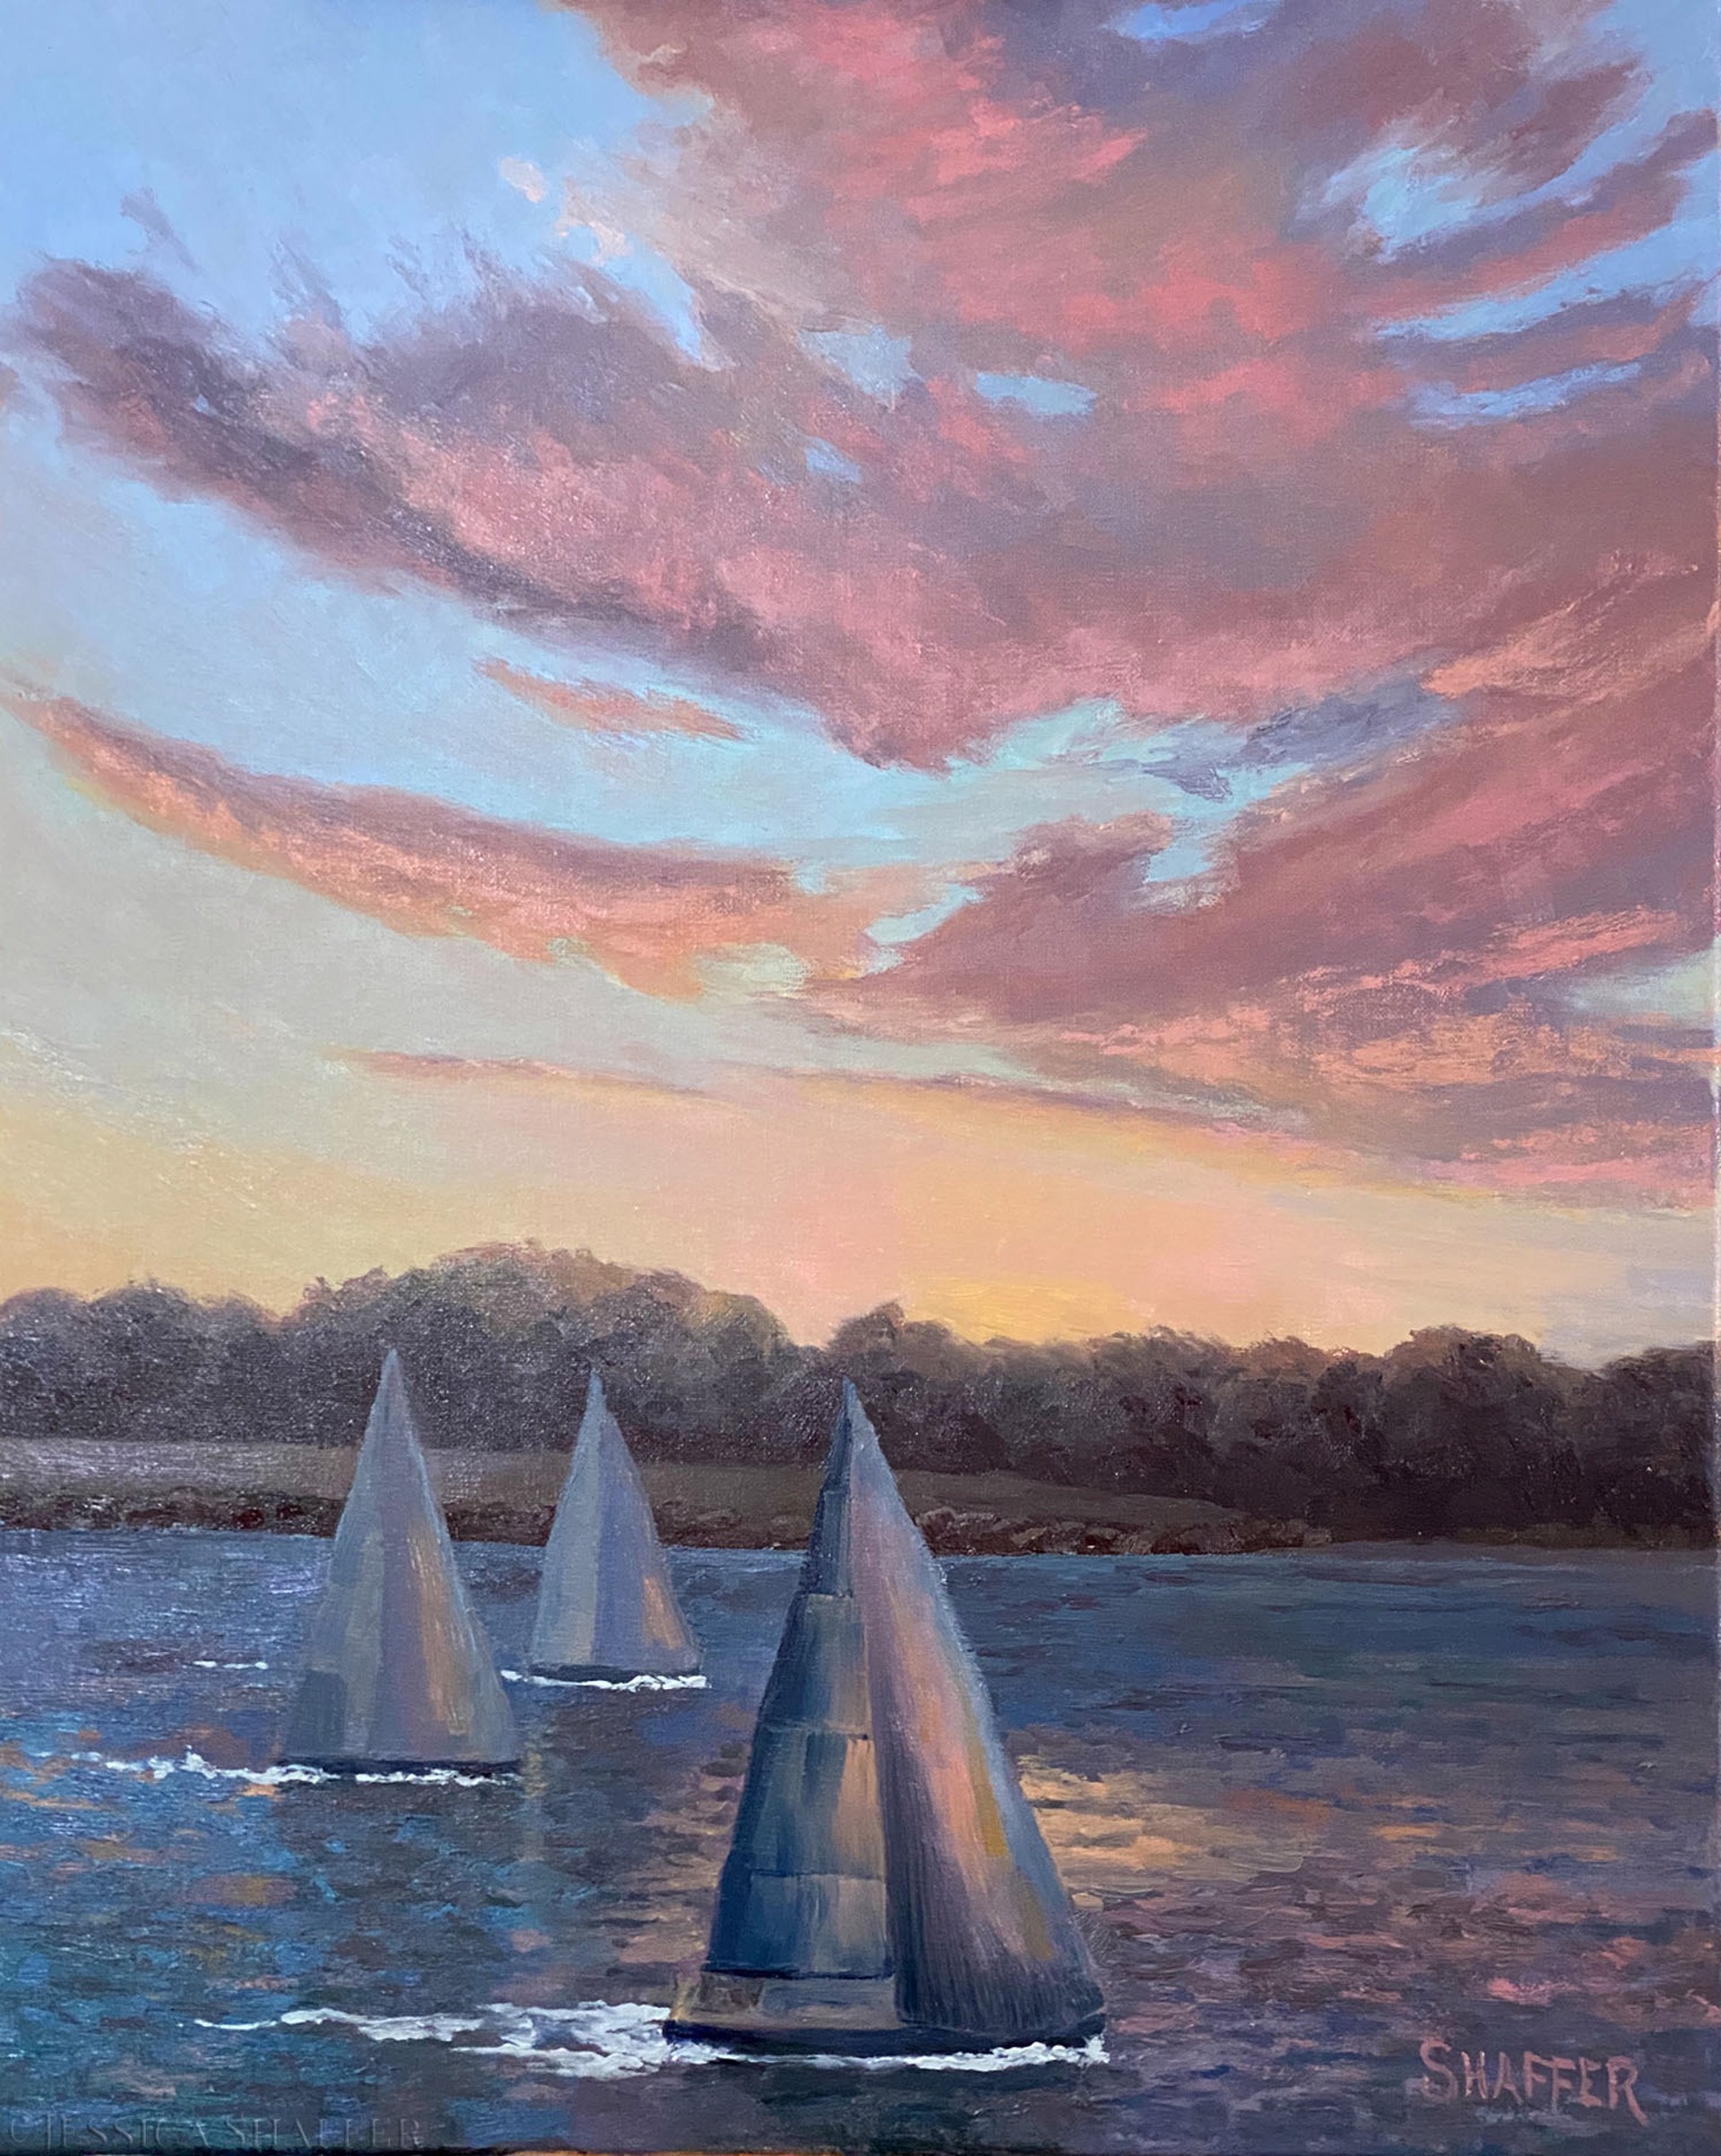 Oil painting of sailboats at sunset racing by Castle Hill, Newport in Narragansett Bay